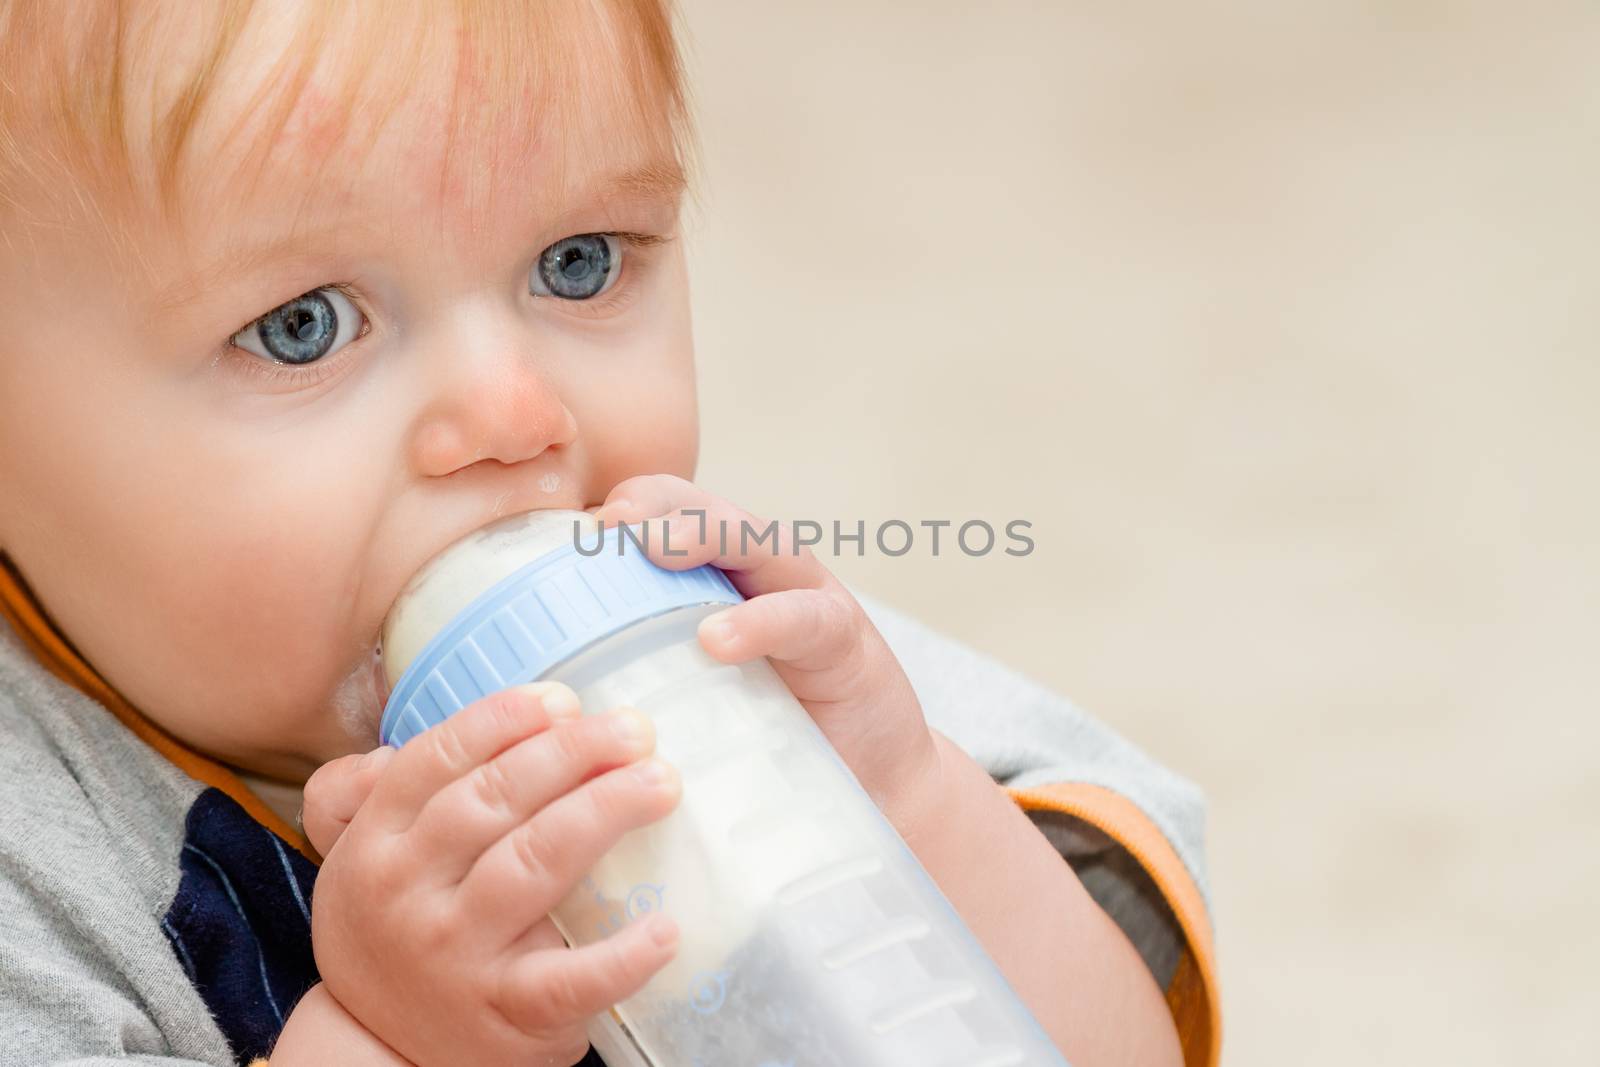 Boy with a milk bottle up to his mount drinking away while seated. There is some milke leakage around the mount and upper lip